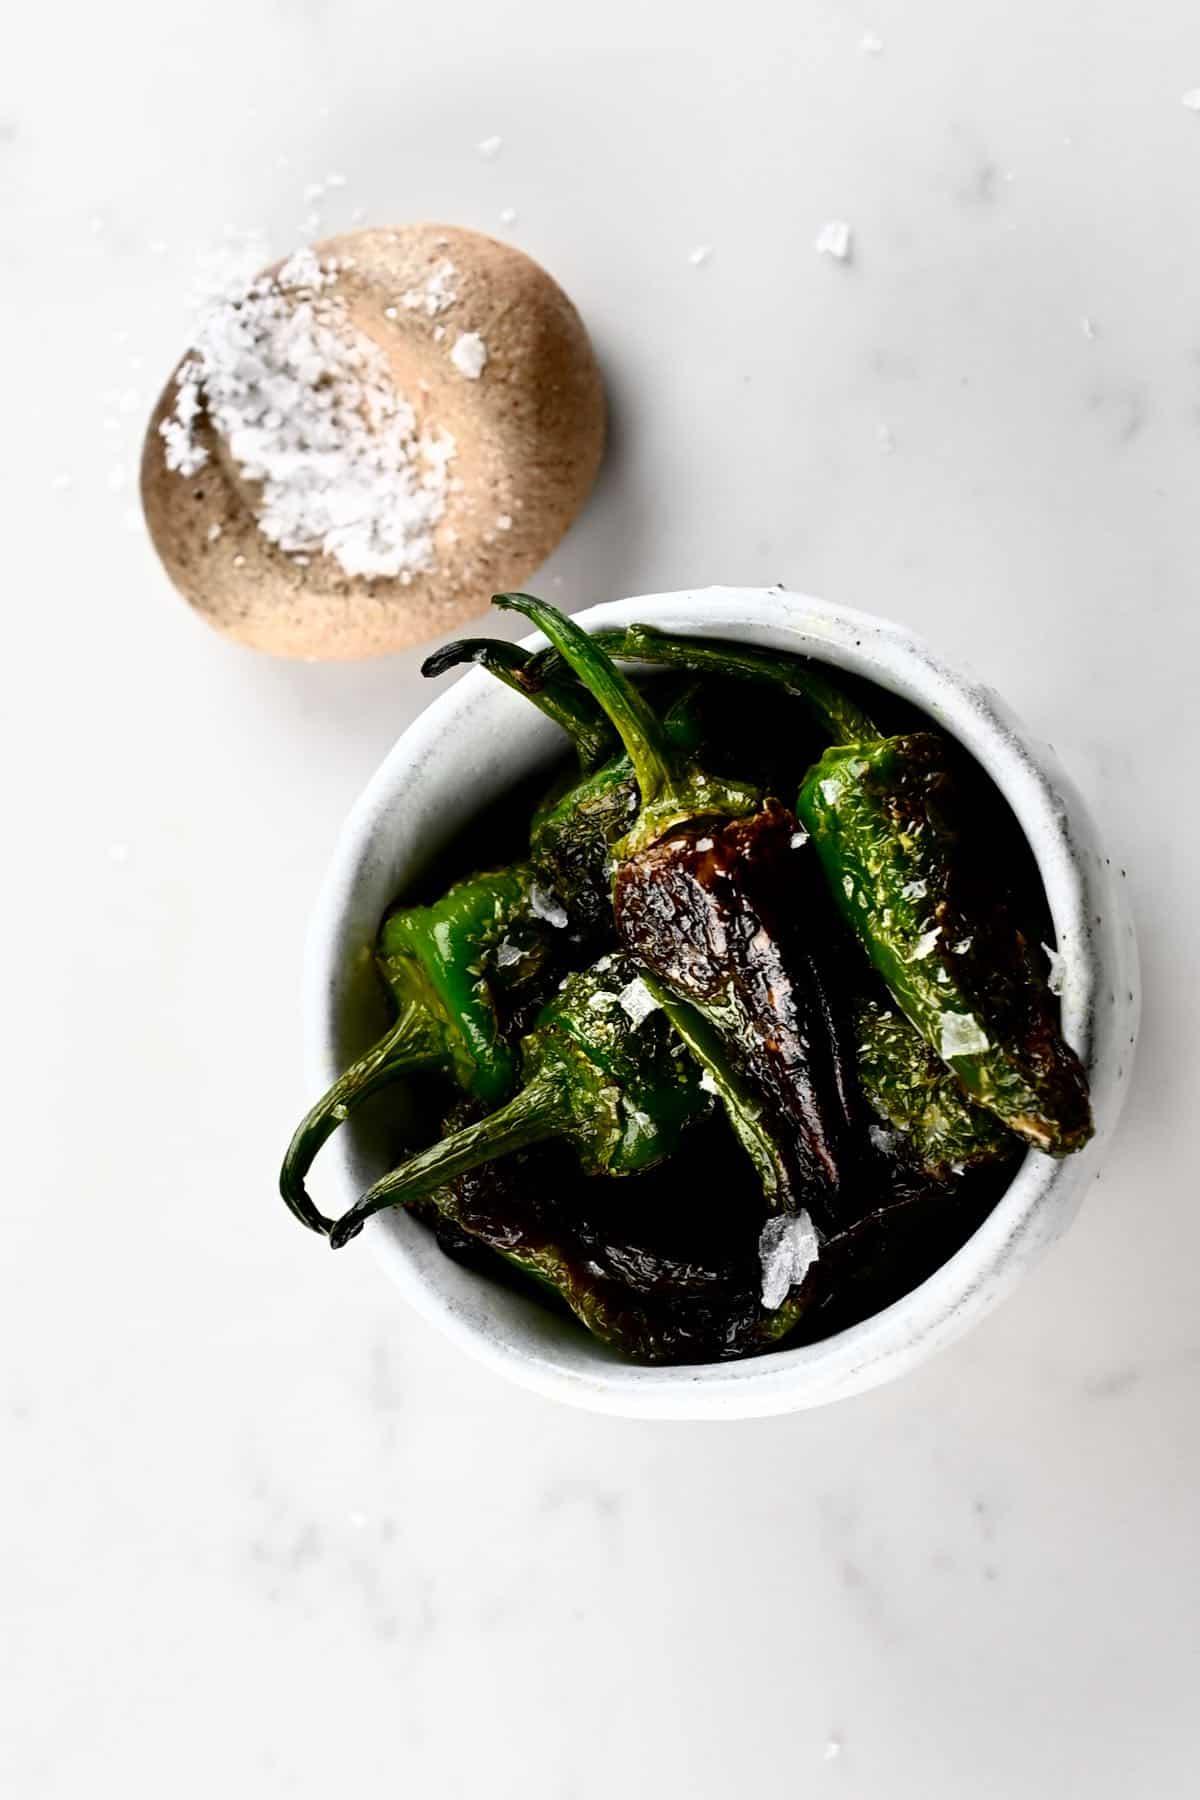 Padron peppers in a small bowl and salt on the side